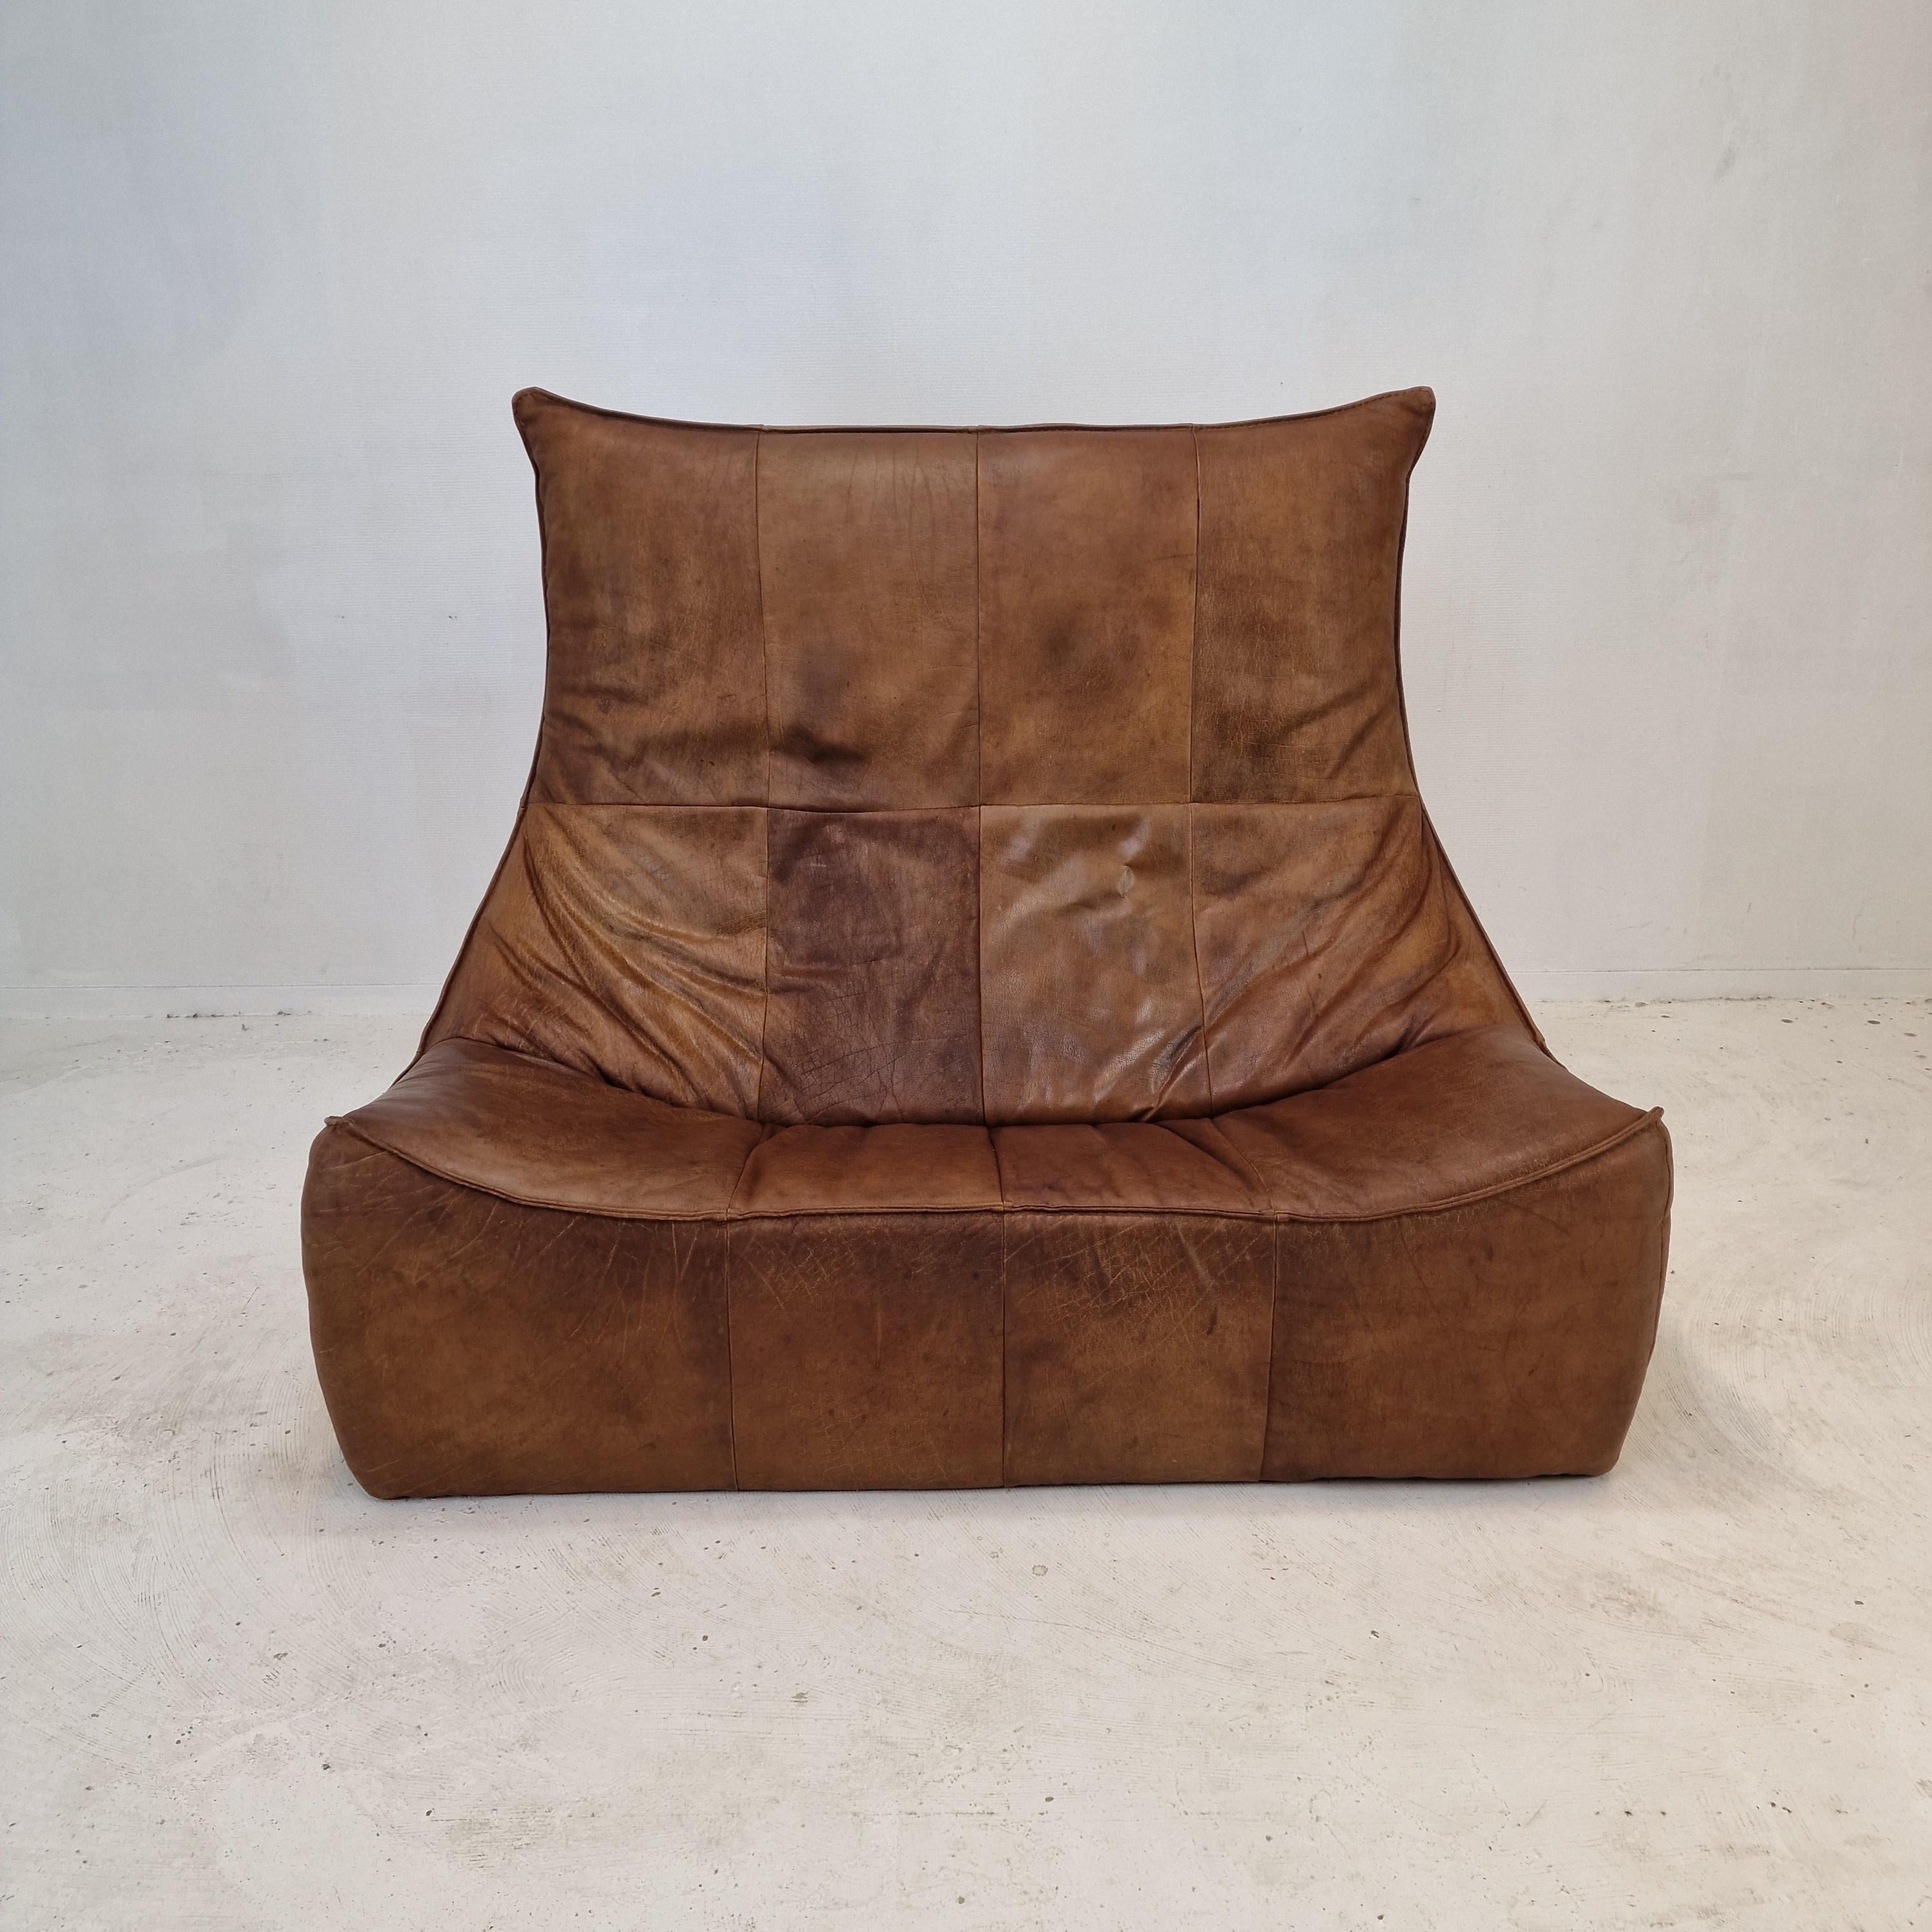 A stunning two seater or loveseat by Gerard Van Den Berg for Montis. 

This magnificent sofa is known as 